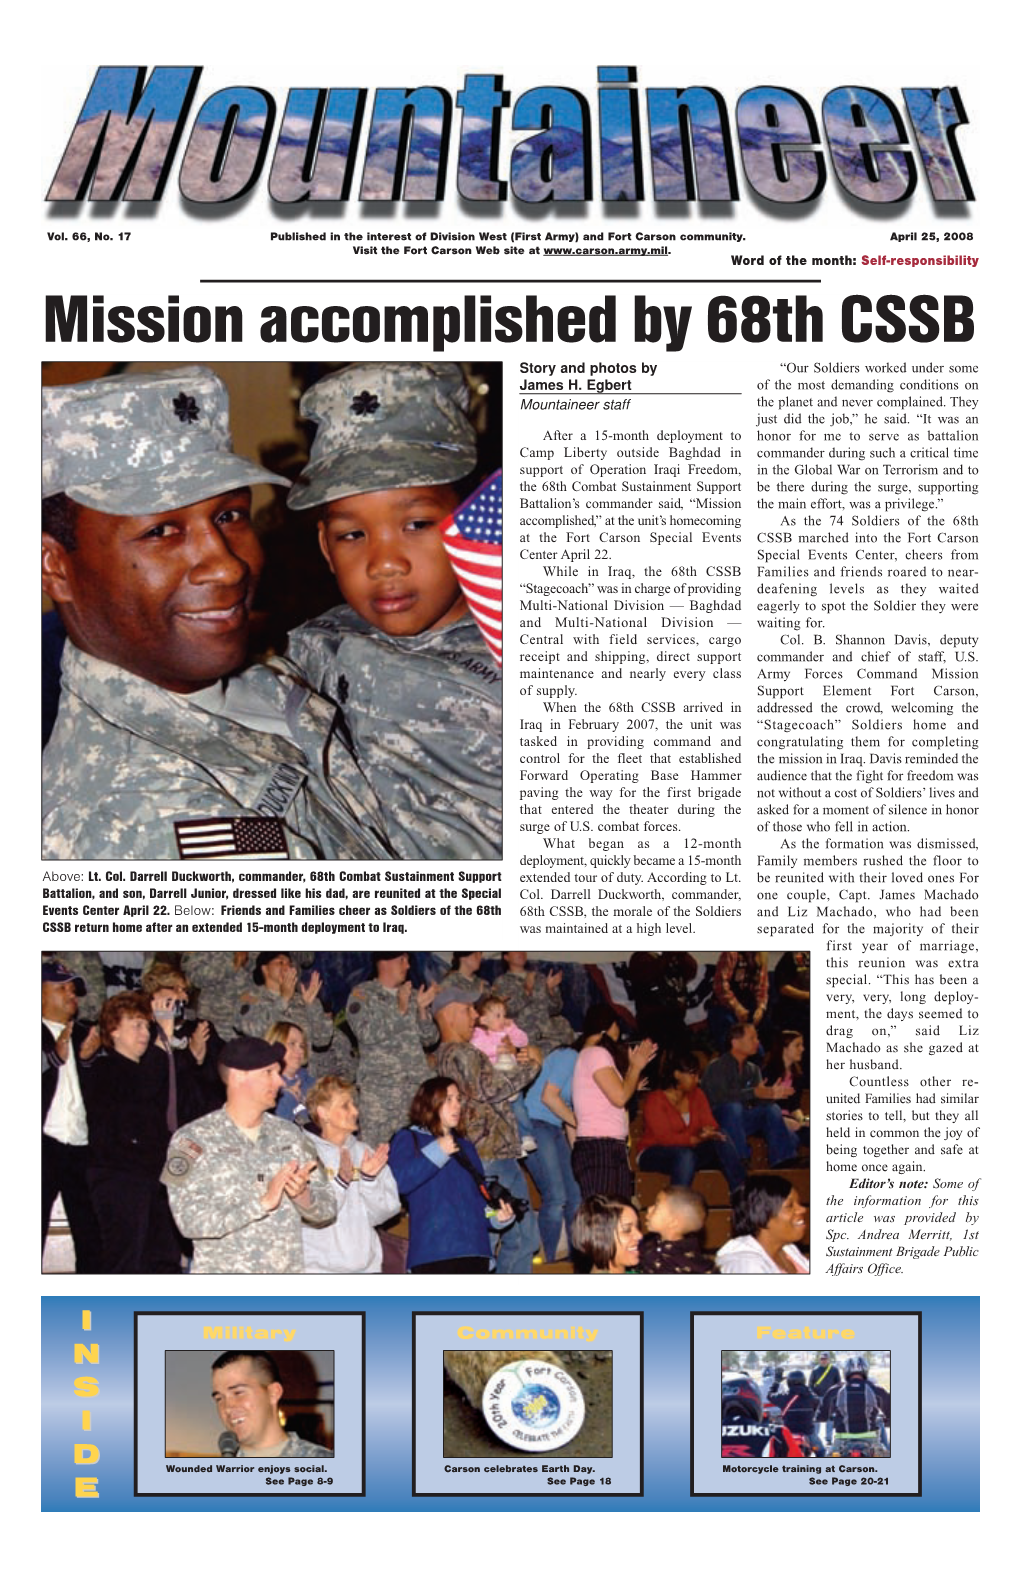 Mission Accomplished by 68Th CSSB Story and Photos by “Our Soldiers Worked Under Some James H